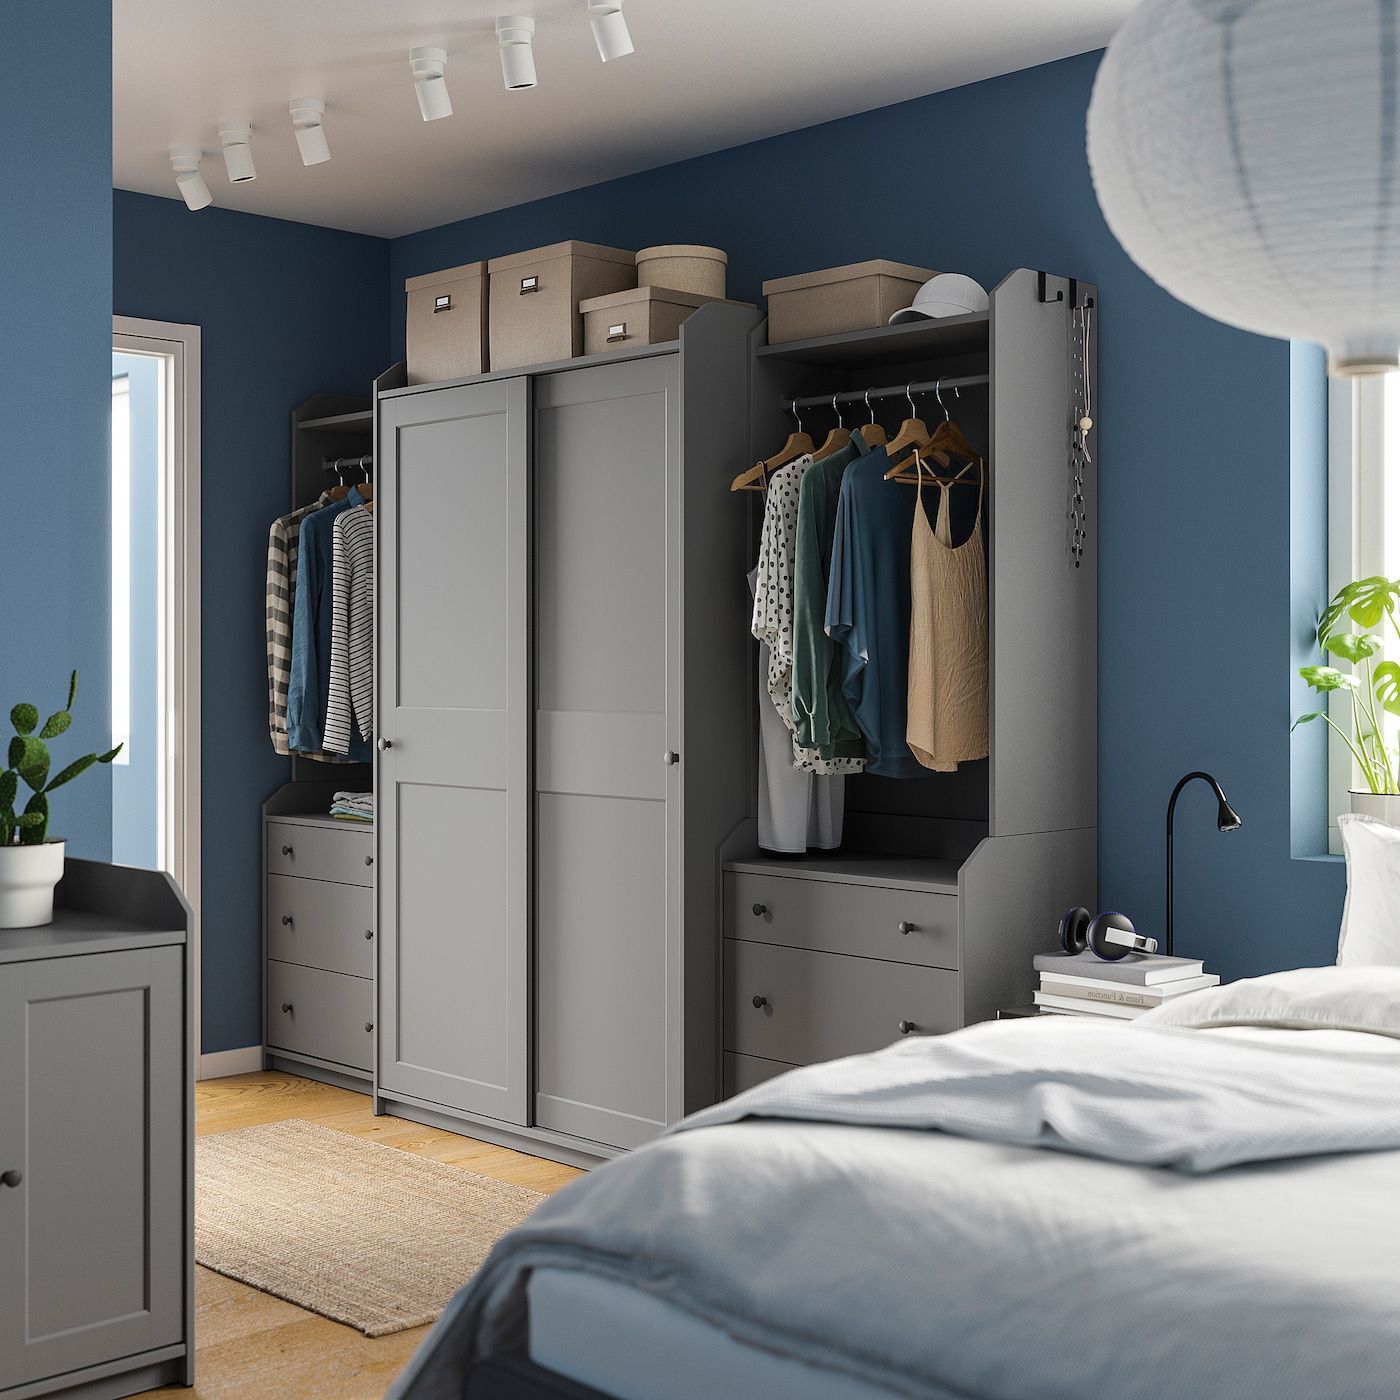 Hauga Wardrobe Combination, Gray, 1015/8x215/8x783/8" – Ikea With Regard To Wardrobes And Drawers Combo (Gallery 5 of 20)